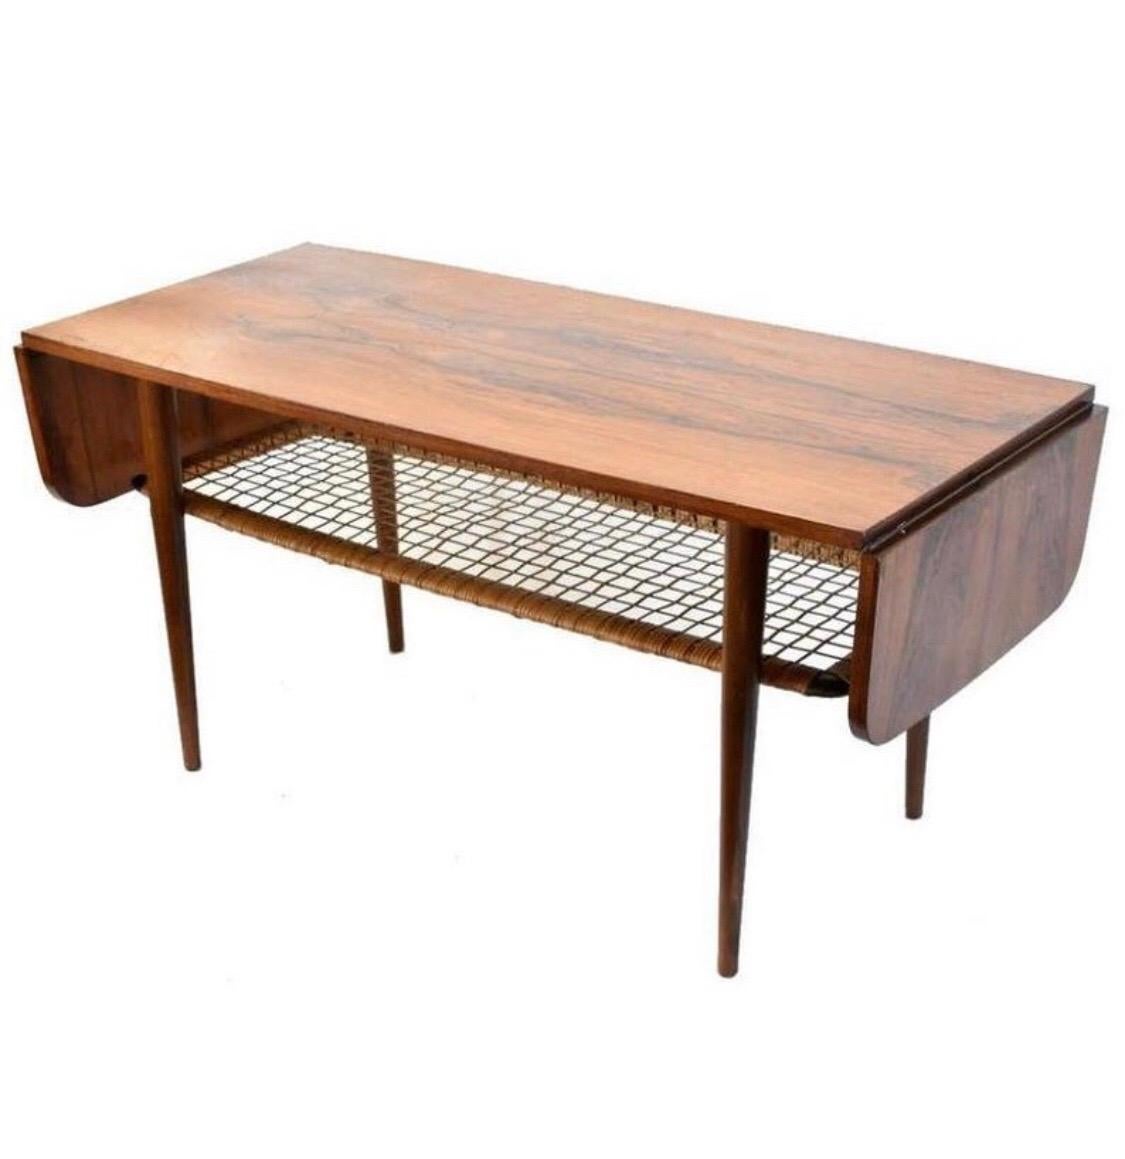 1960s Danish Rosewood Mid-Century Modern Double Leaf Coffee Table For Sale 3